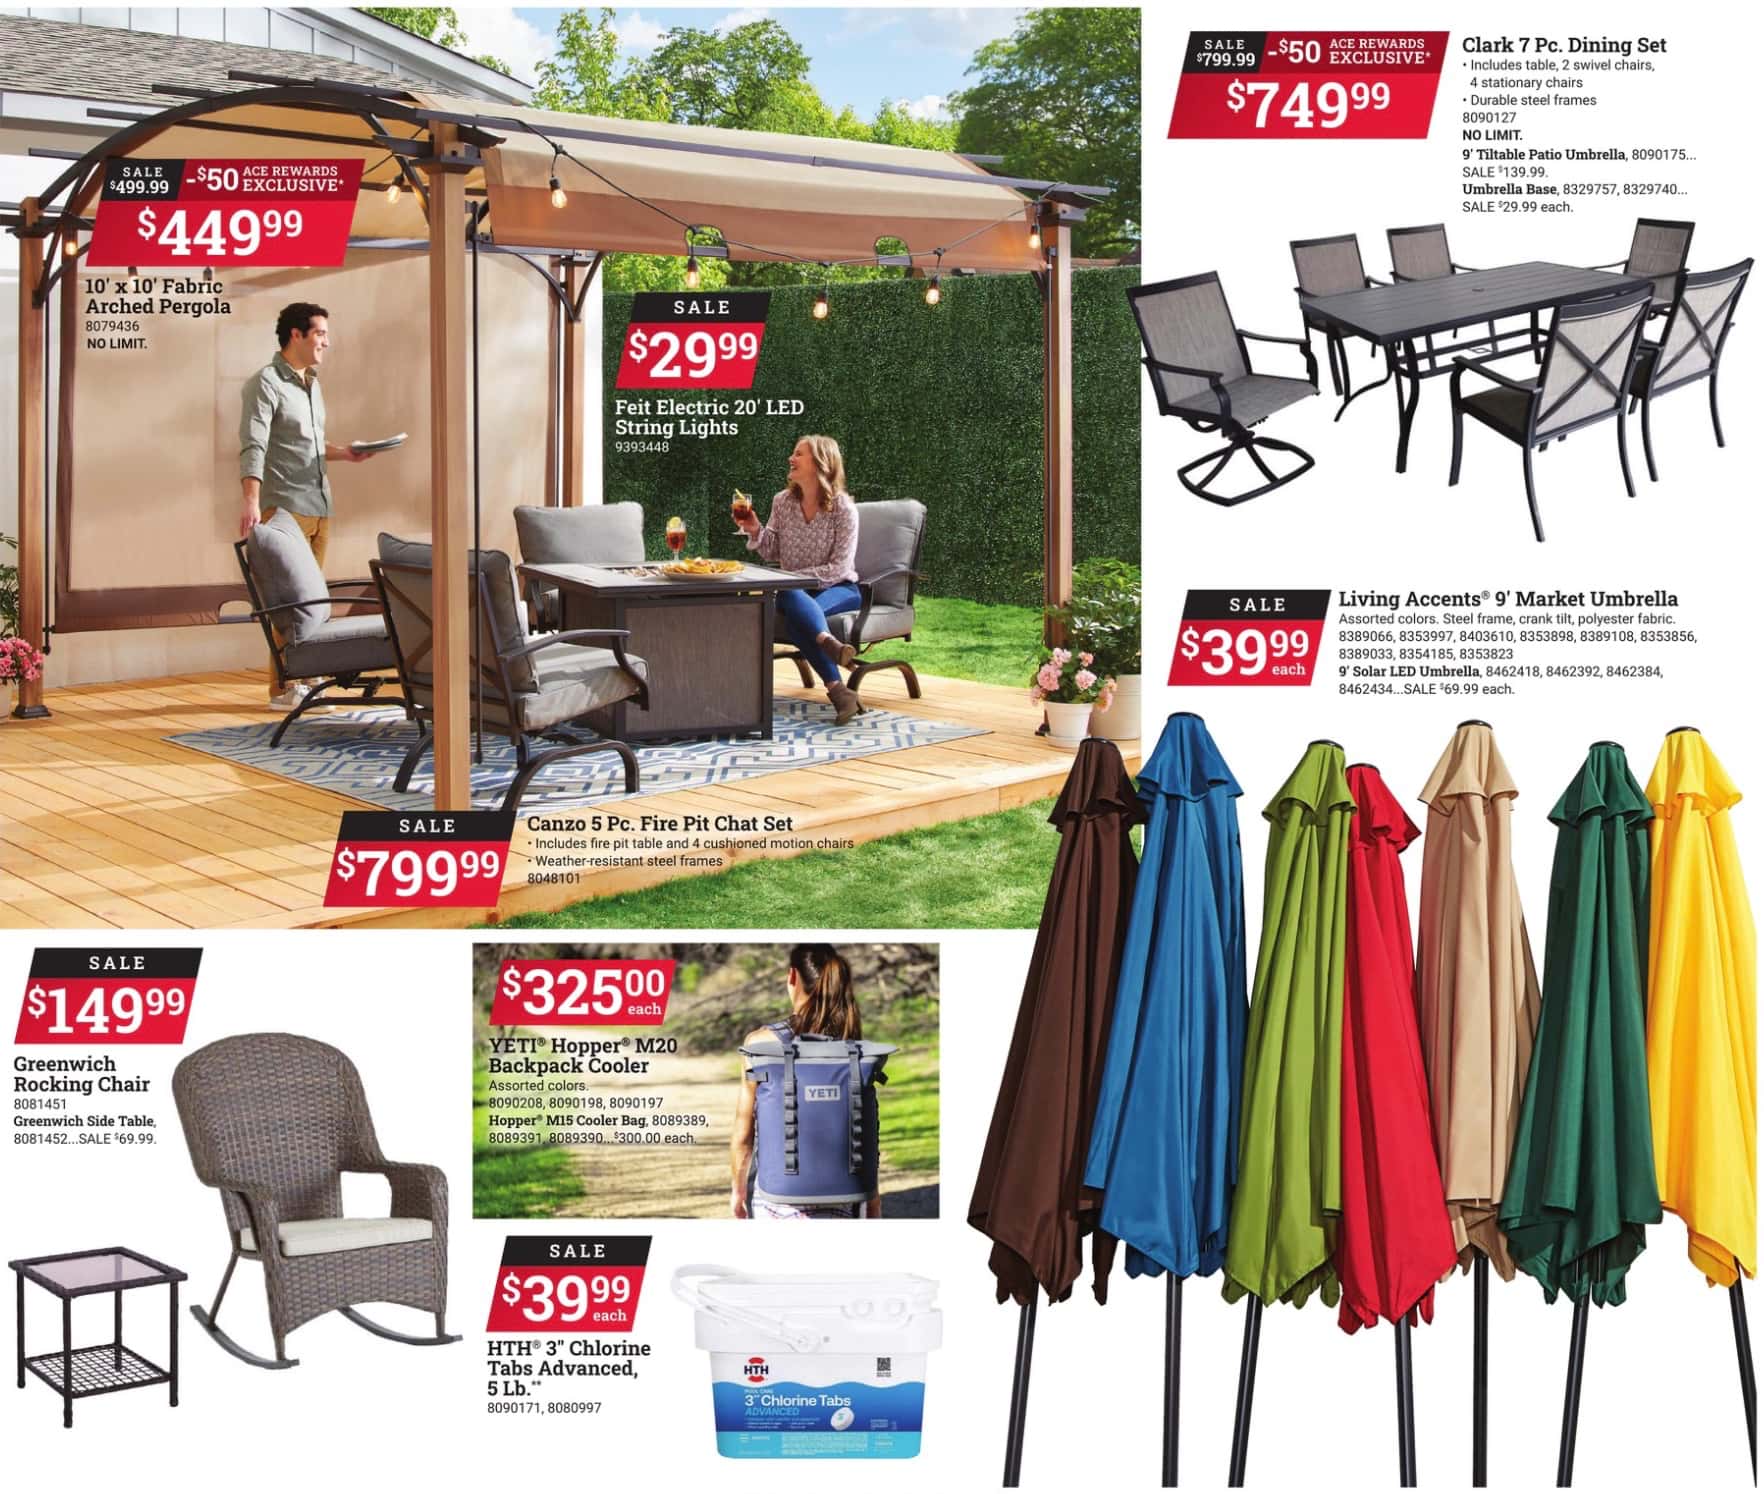 AceHardware_weekly_ad_040124_06